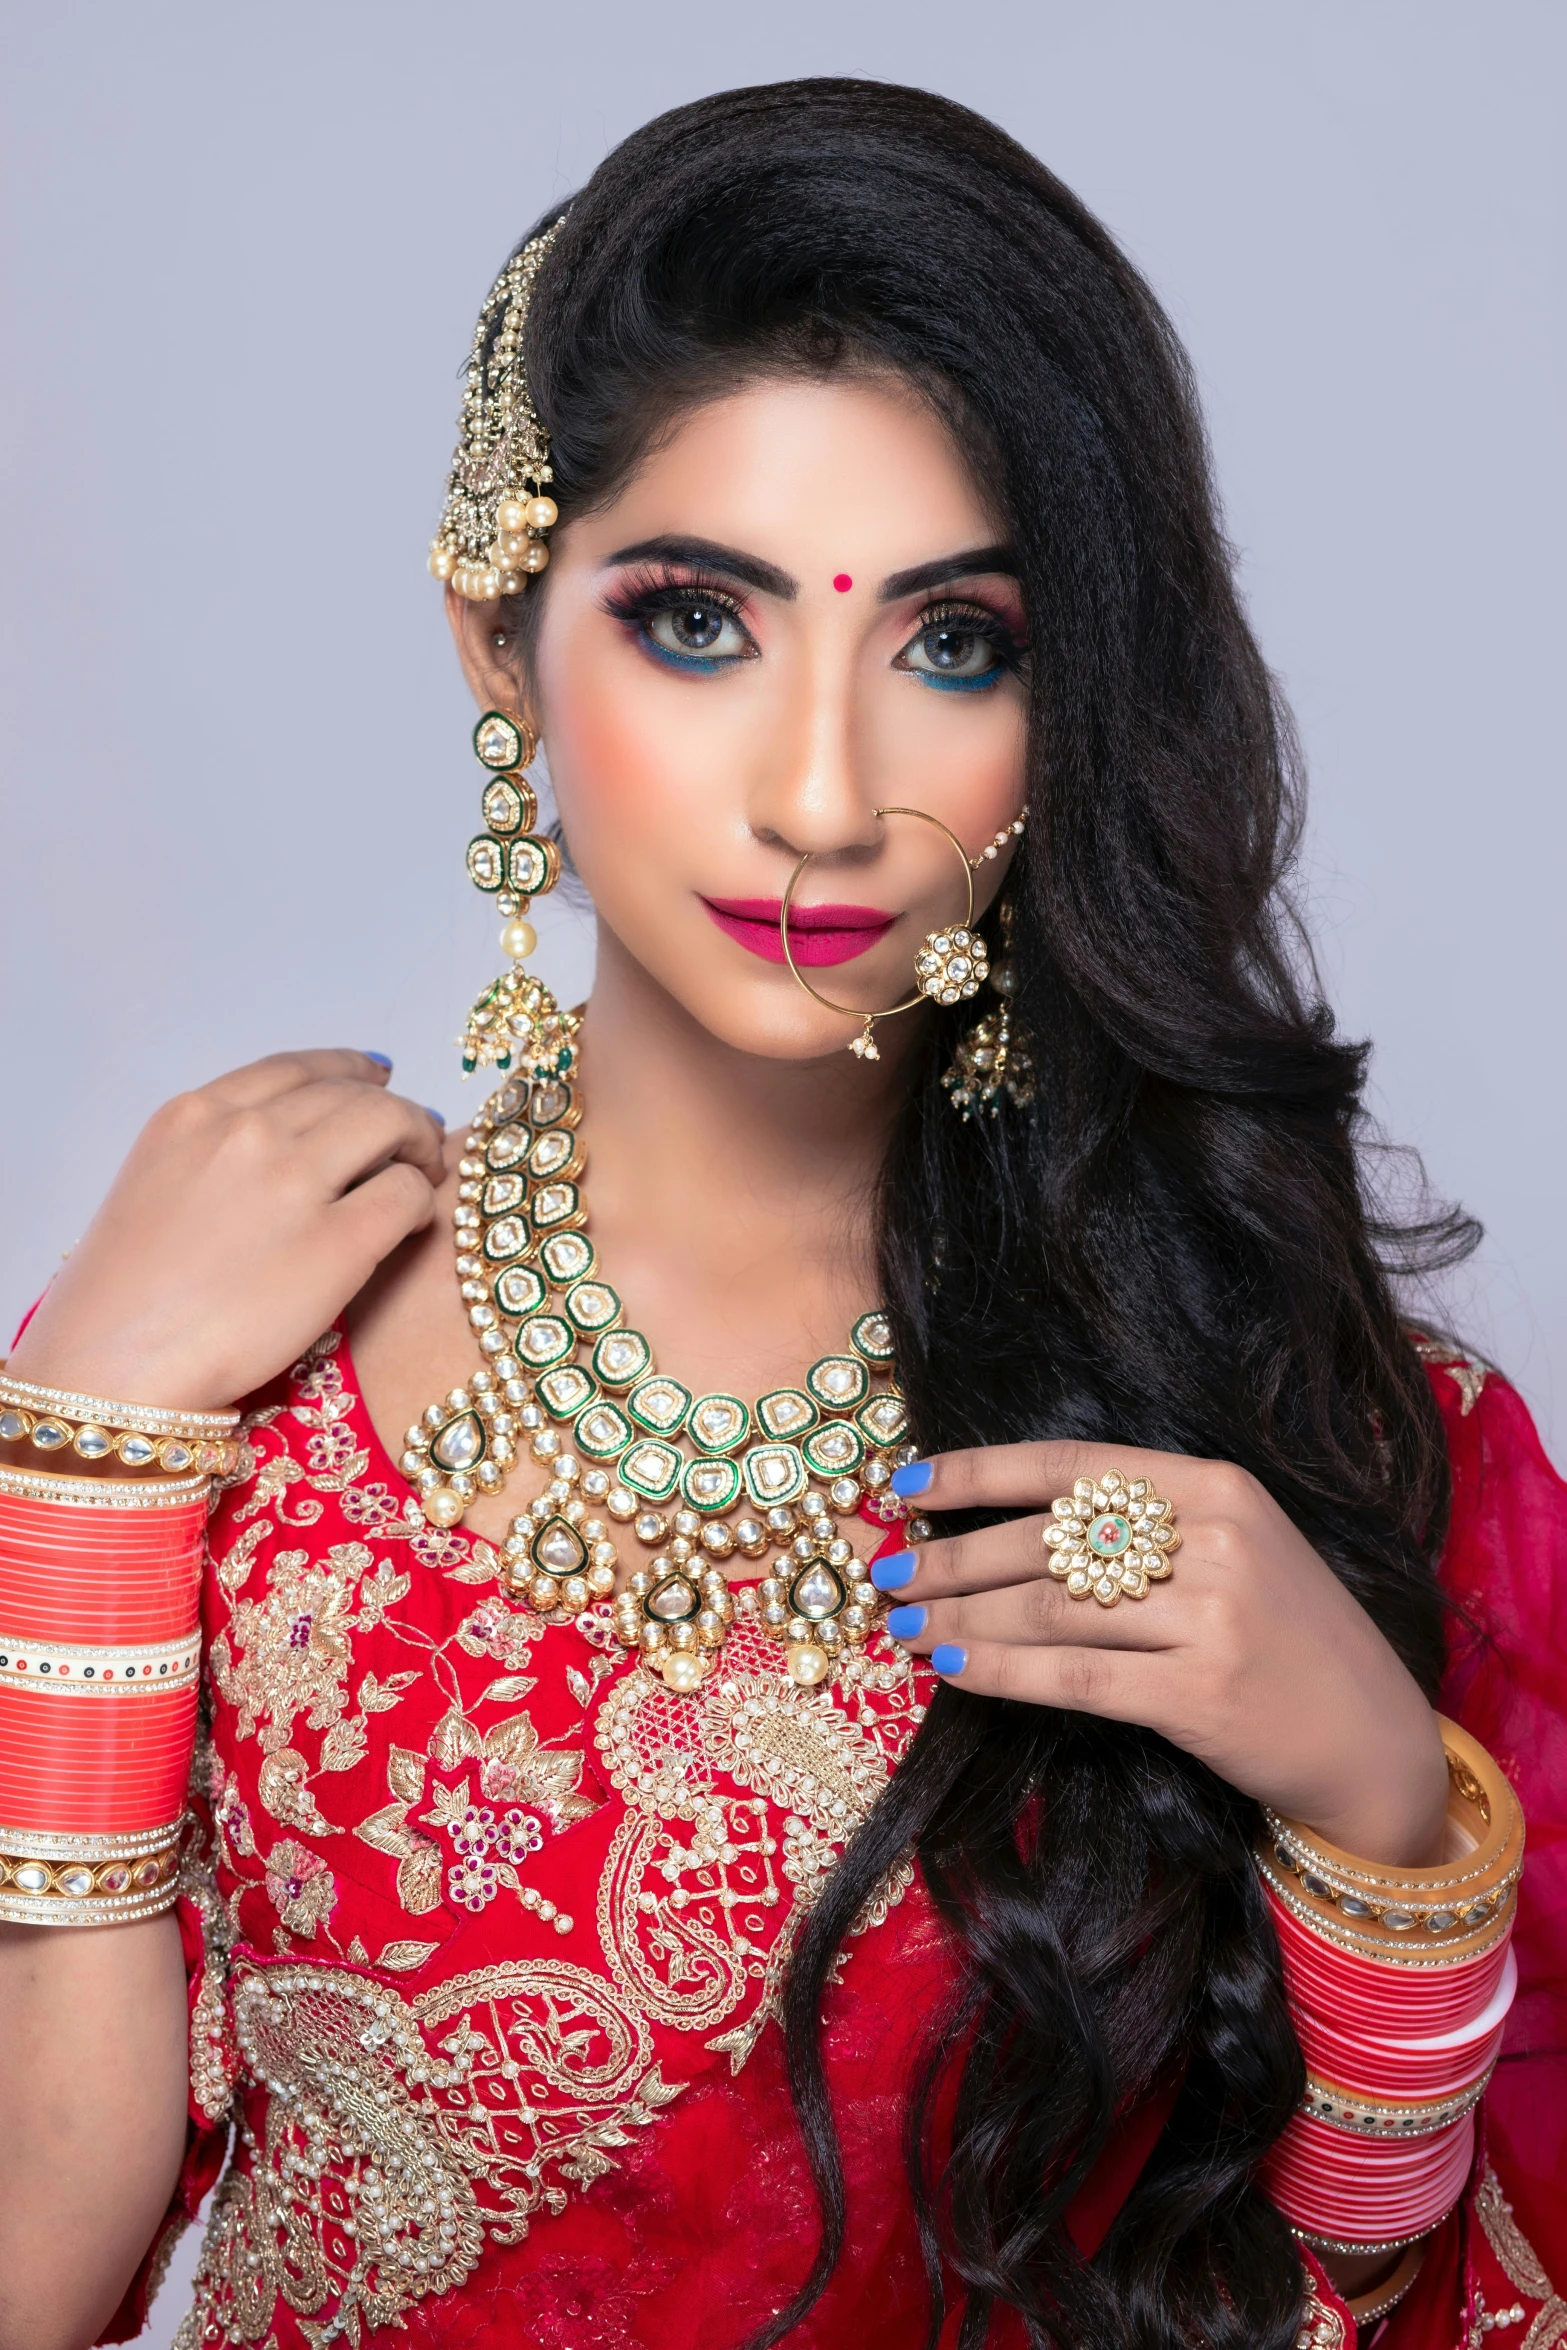 a woman with long hair and makeup wearing jewellery